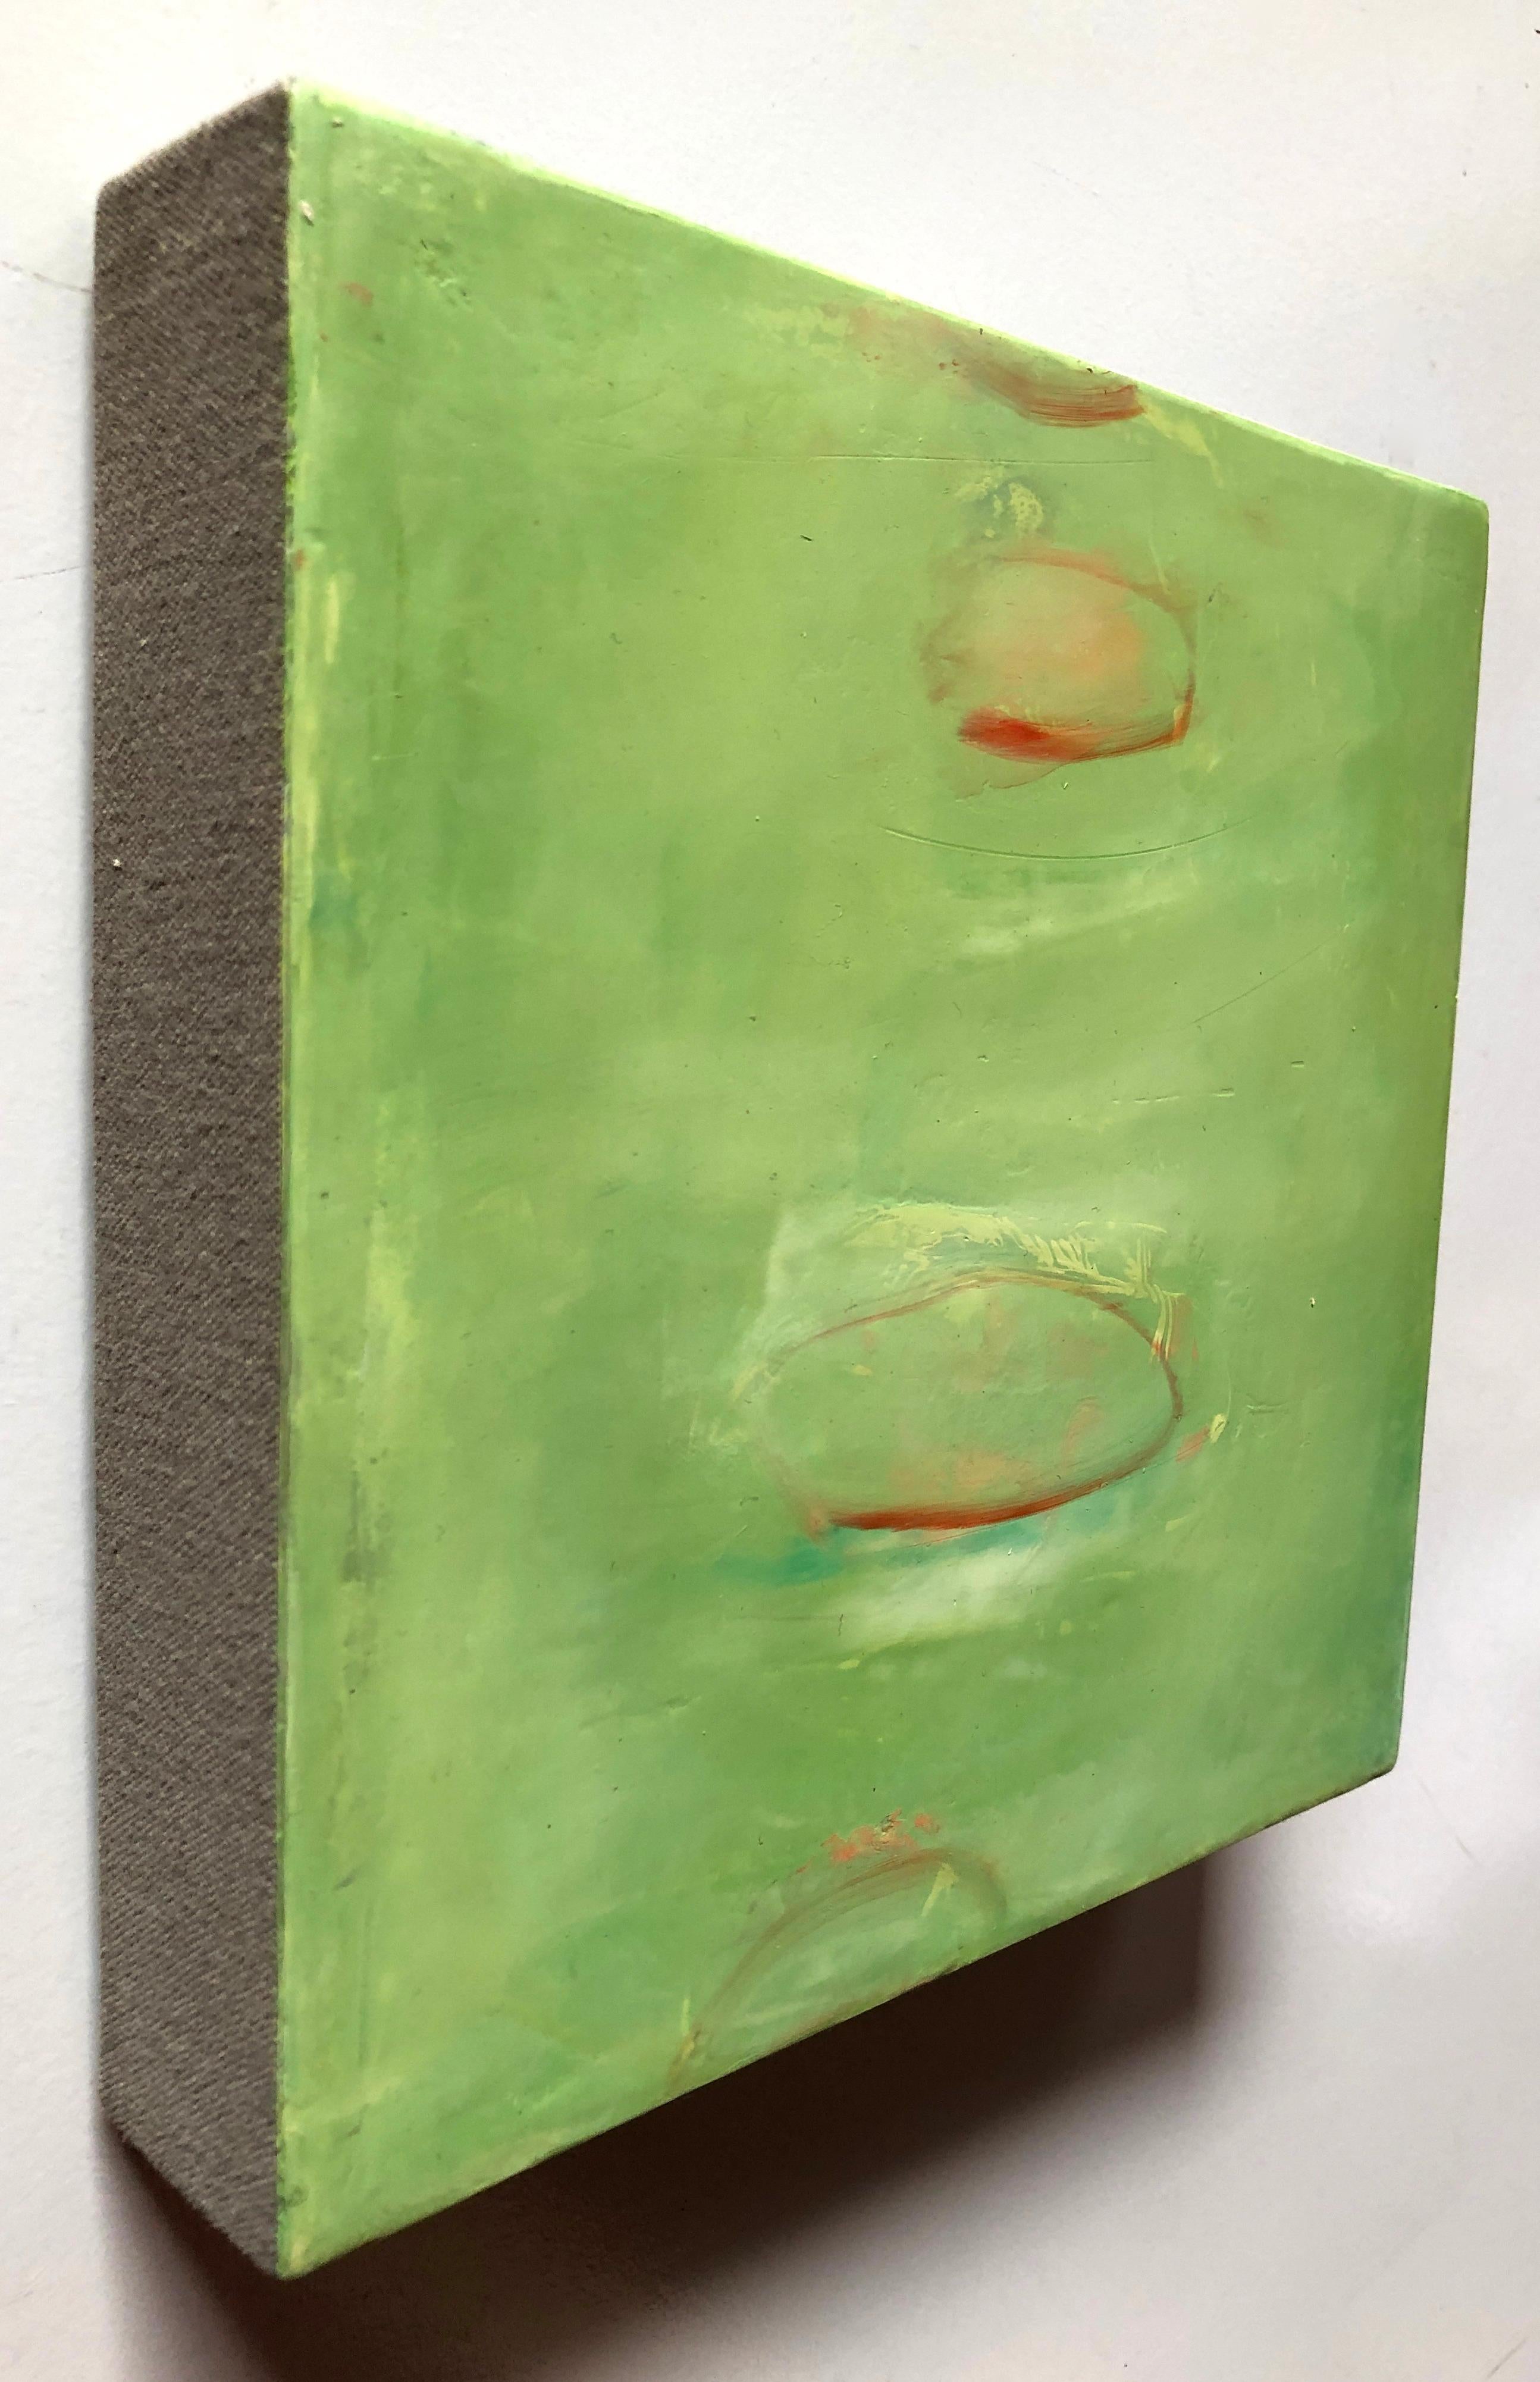 The Green, Michele Mikesell's Oil on canvas, abstract Green colorful painting 1